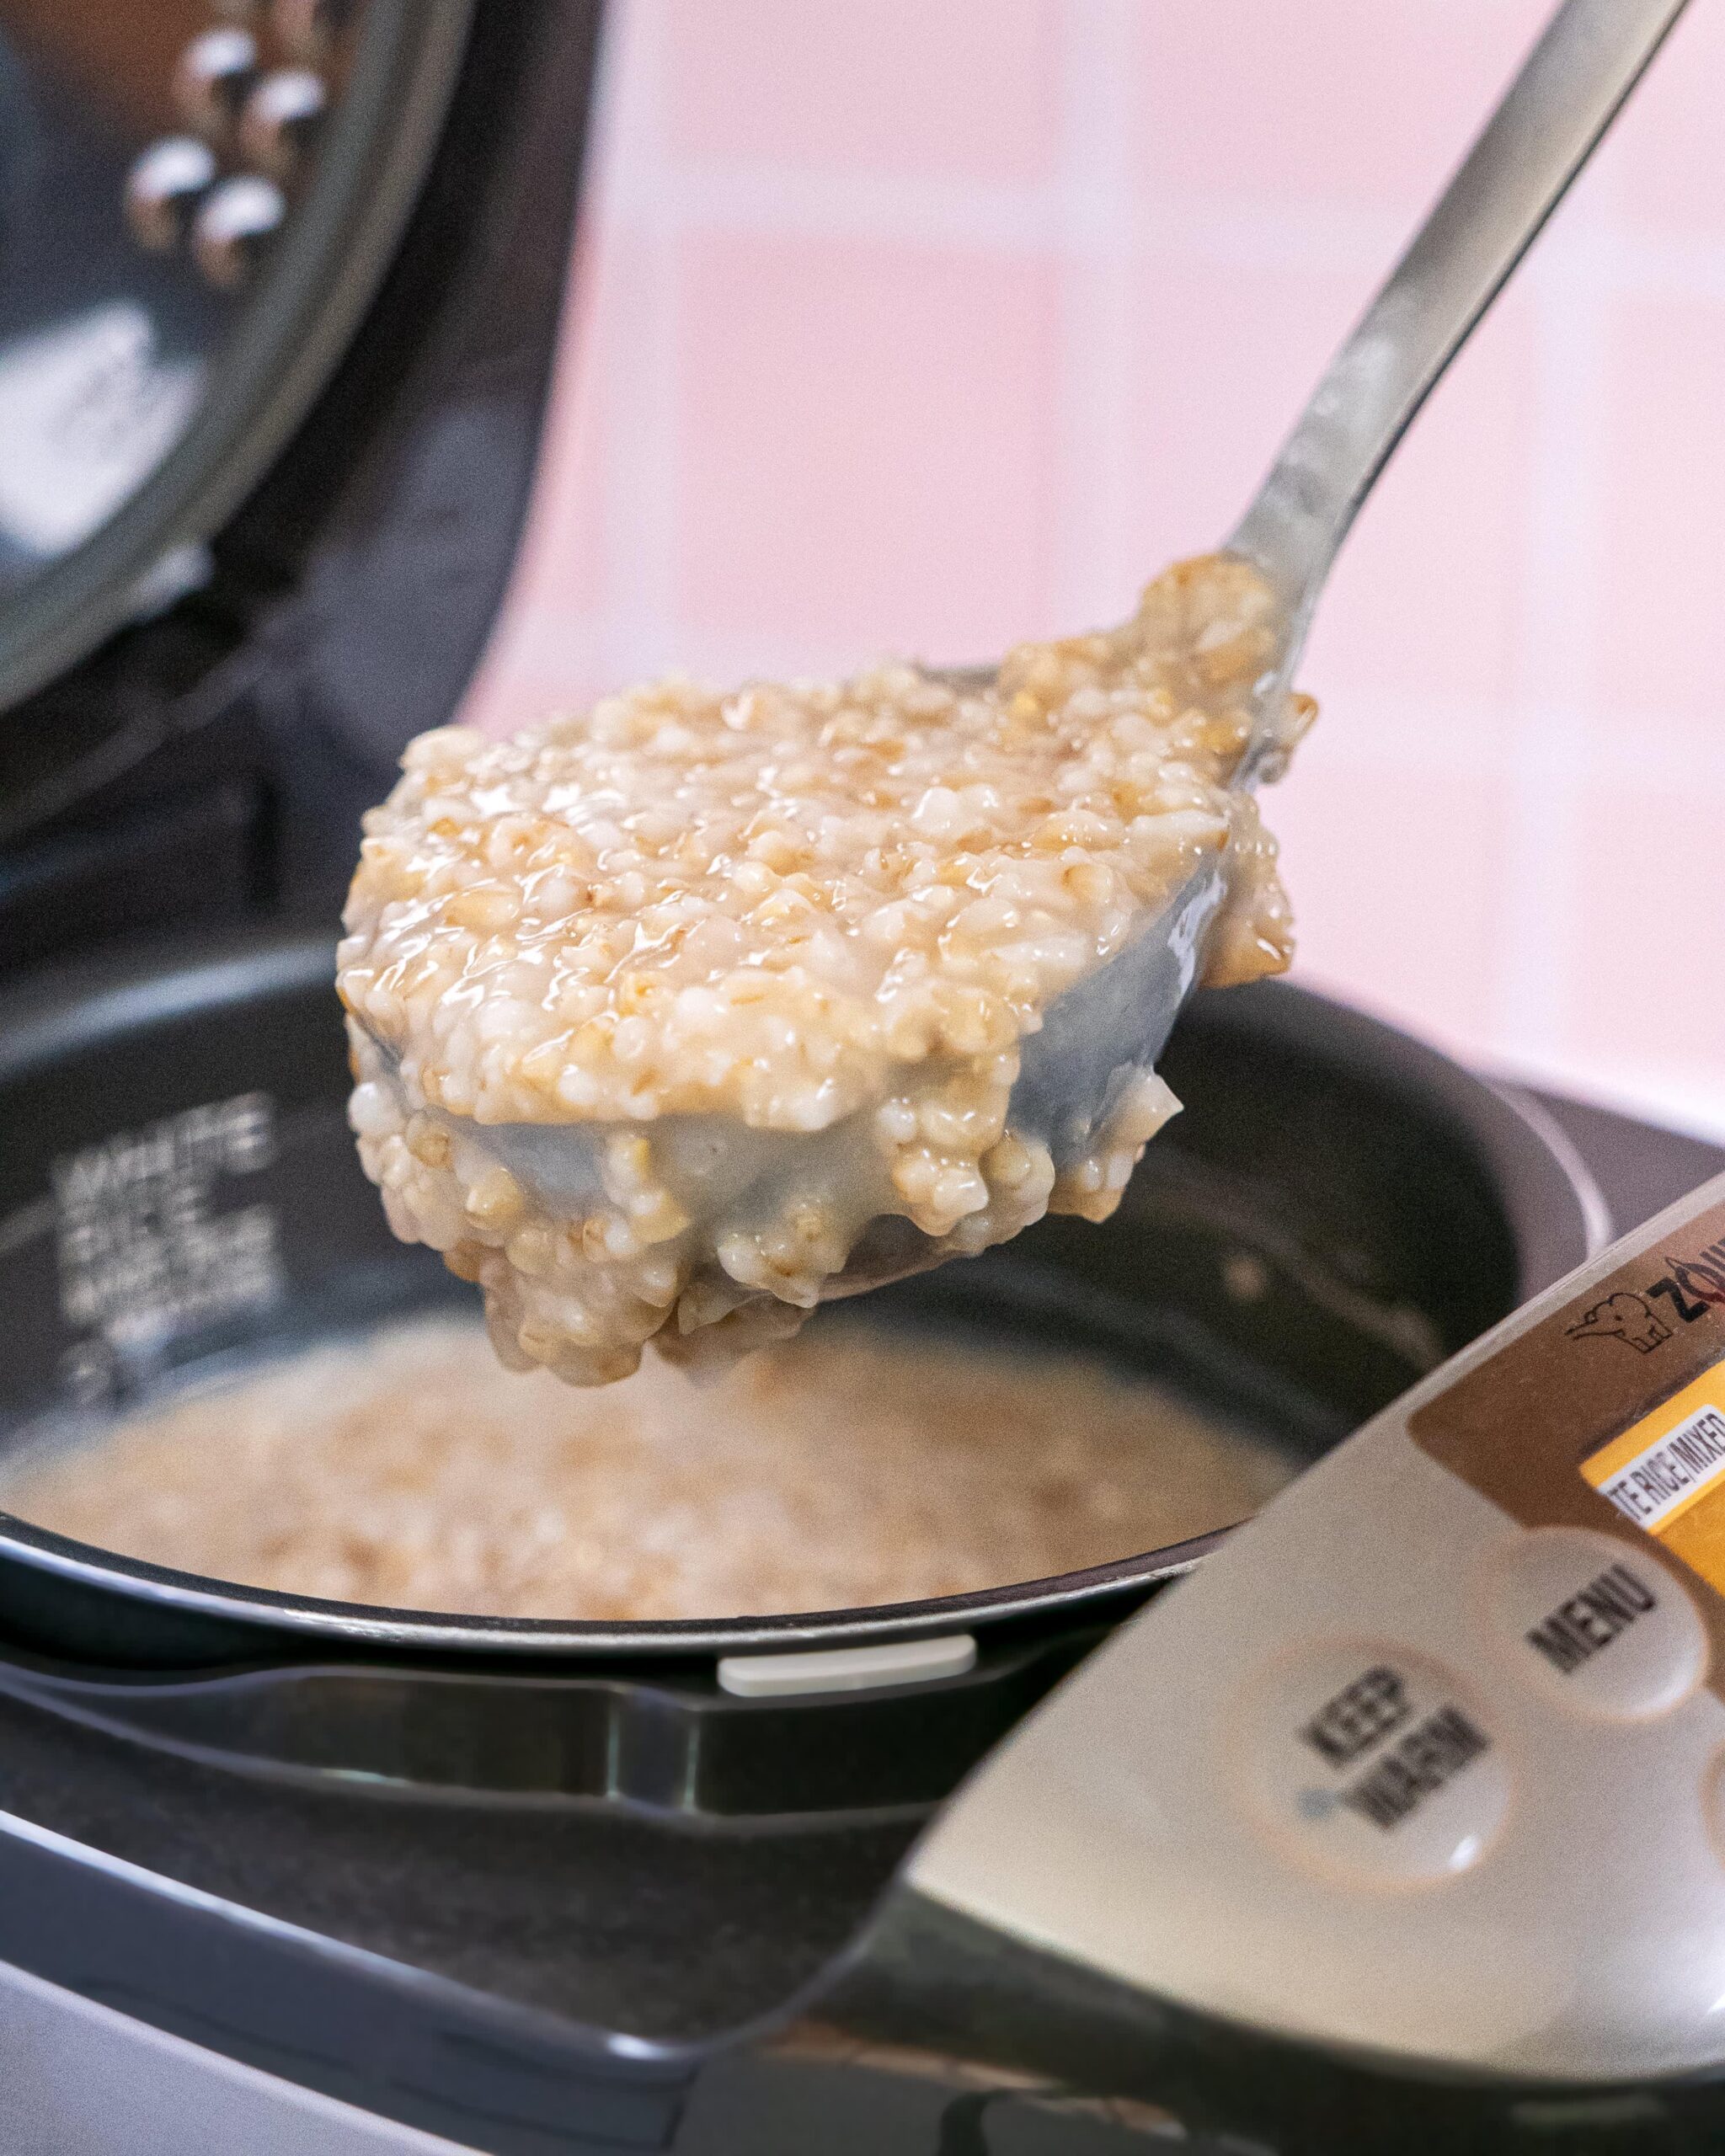  Warming, comforting and perfect for chilly mornings, enjoy a bowl of Scottish oatmeal!